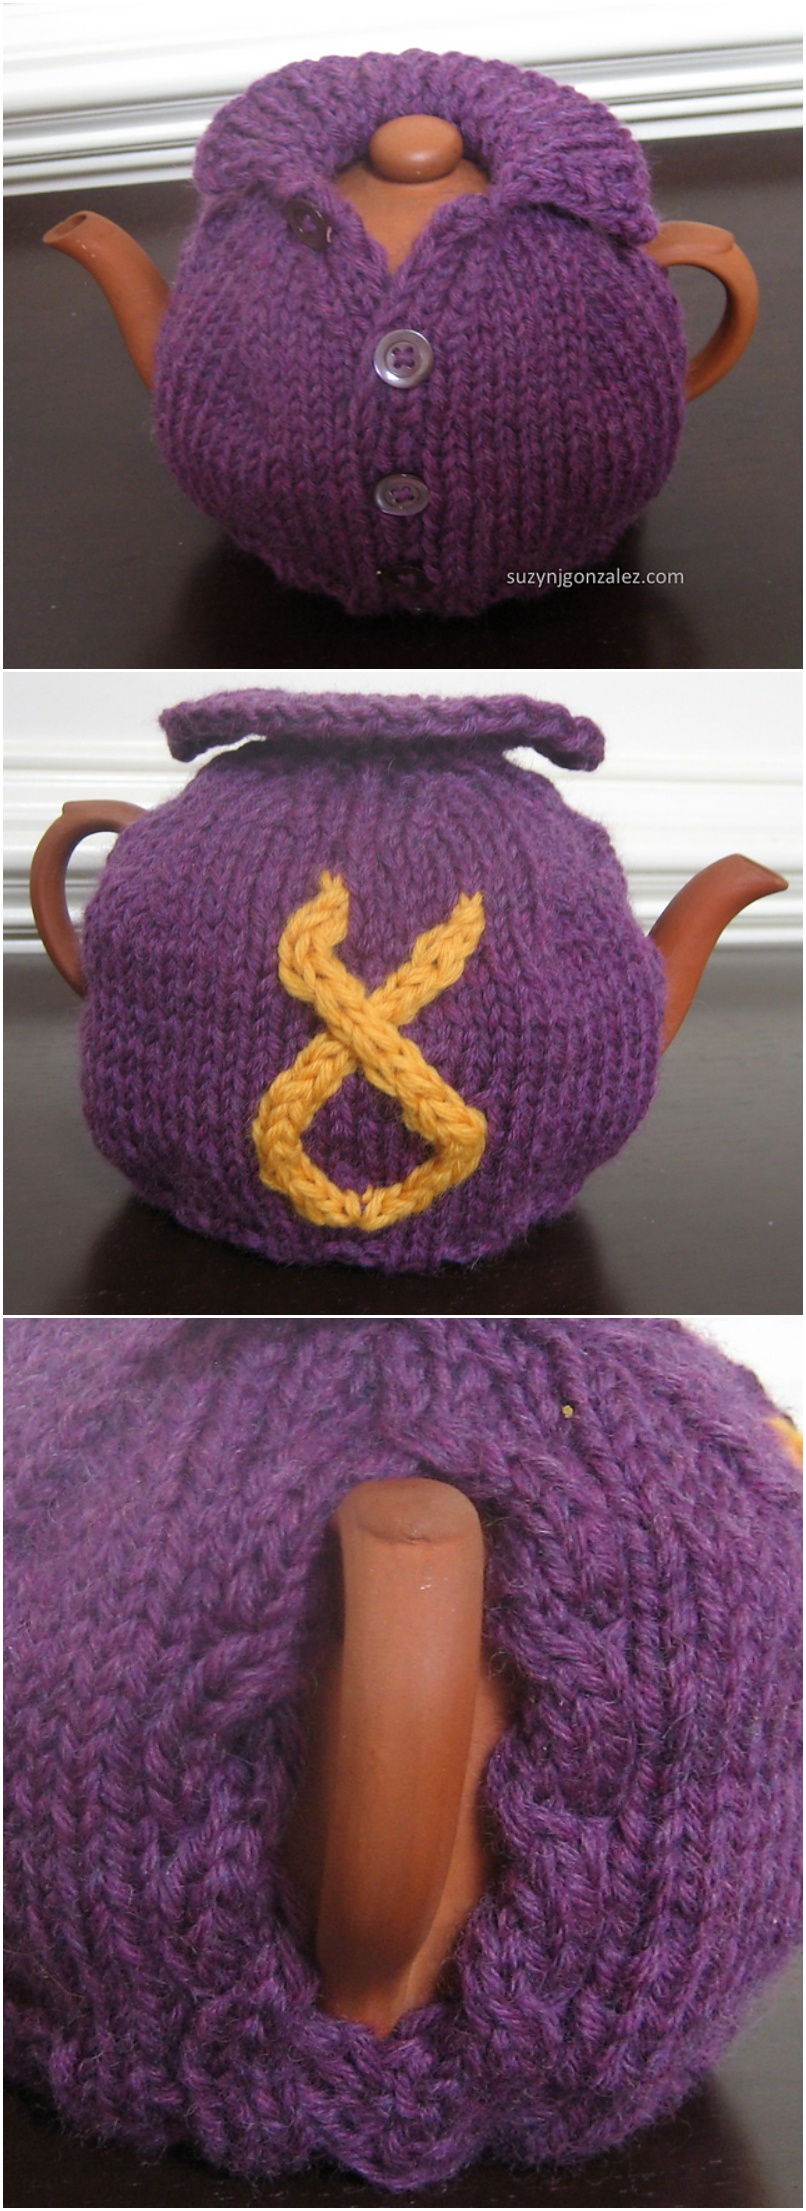 Knitting Purple Teacozy with pattern